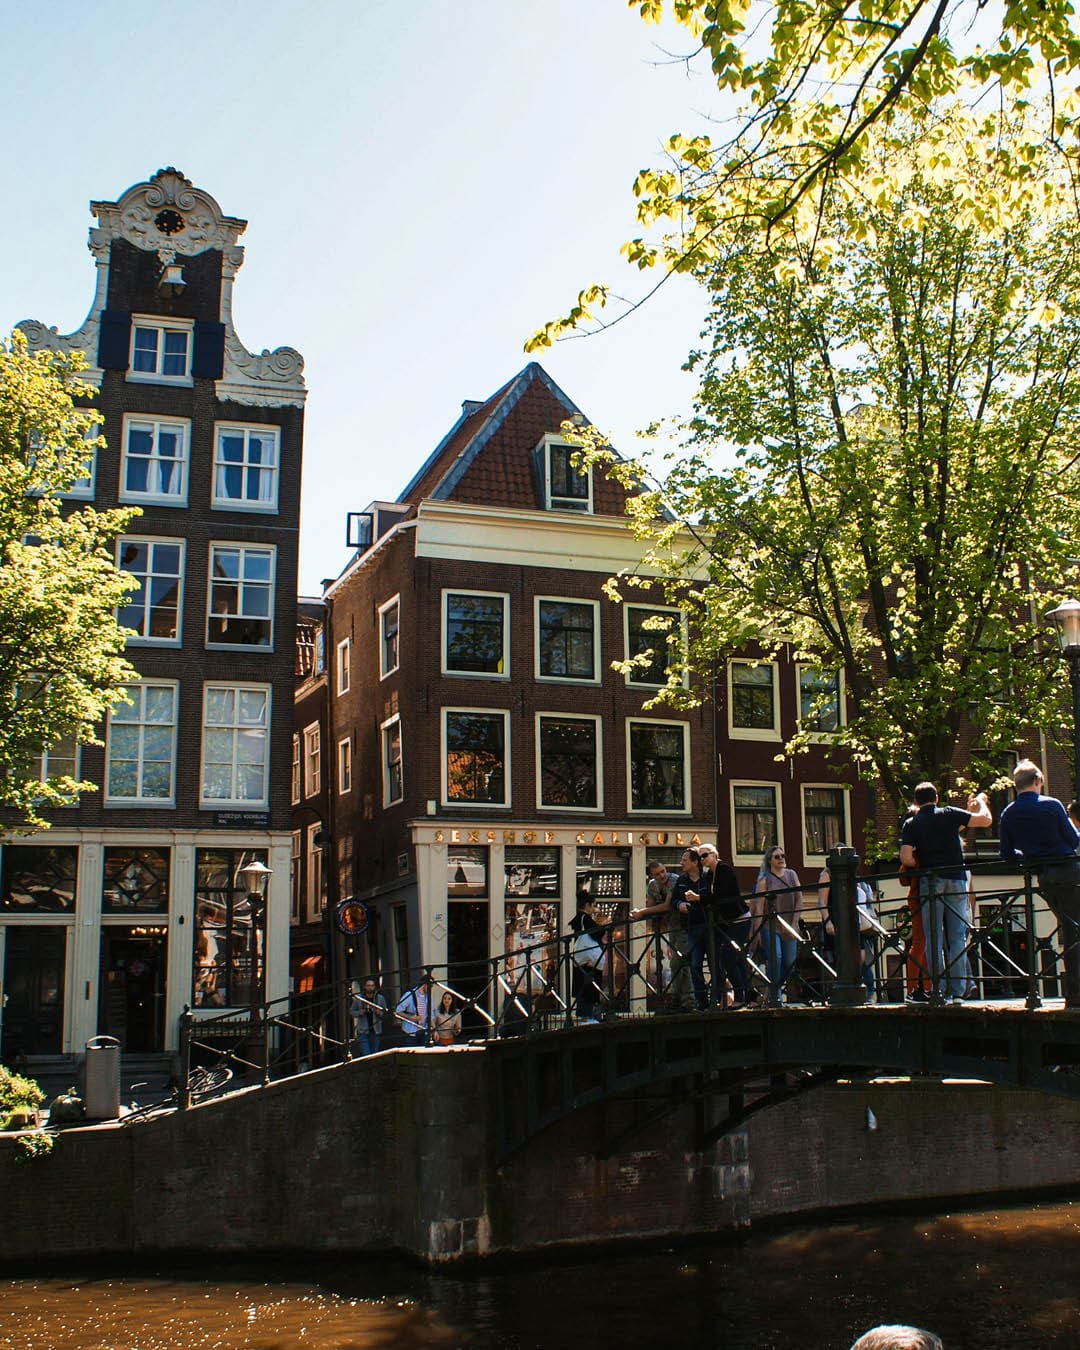 Views of townhouses by the canals in Amsterdam